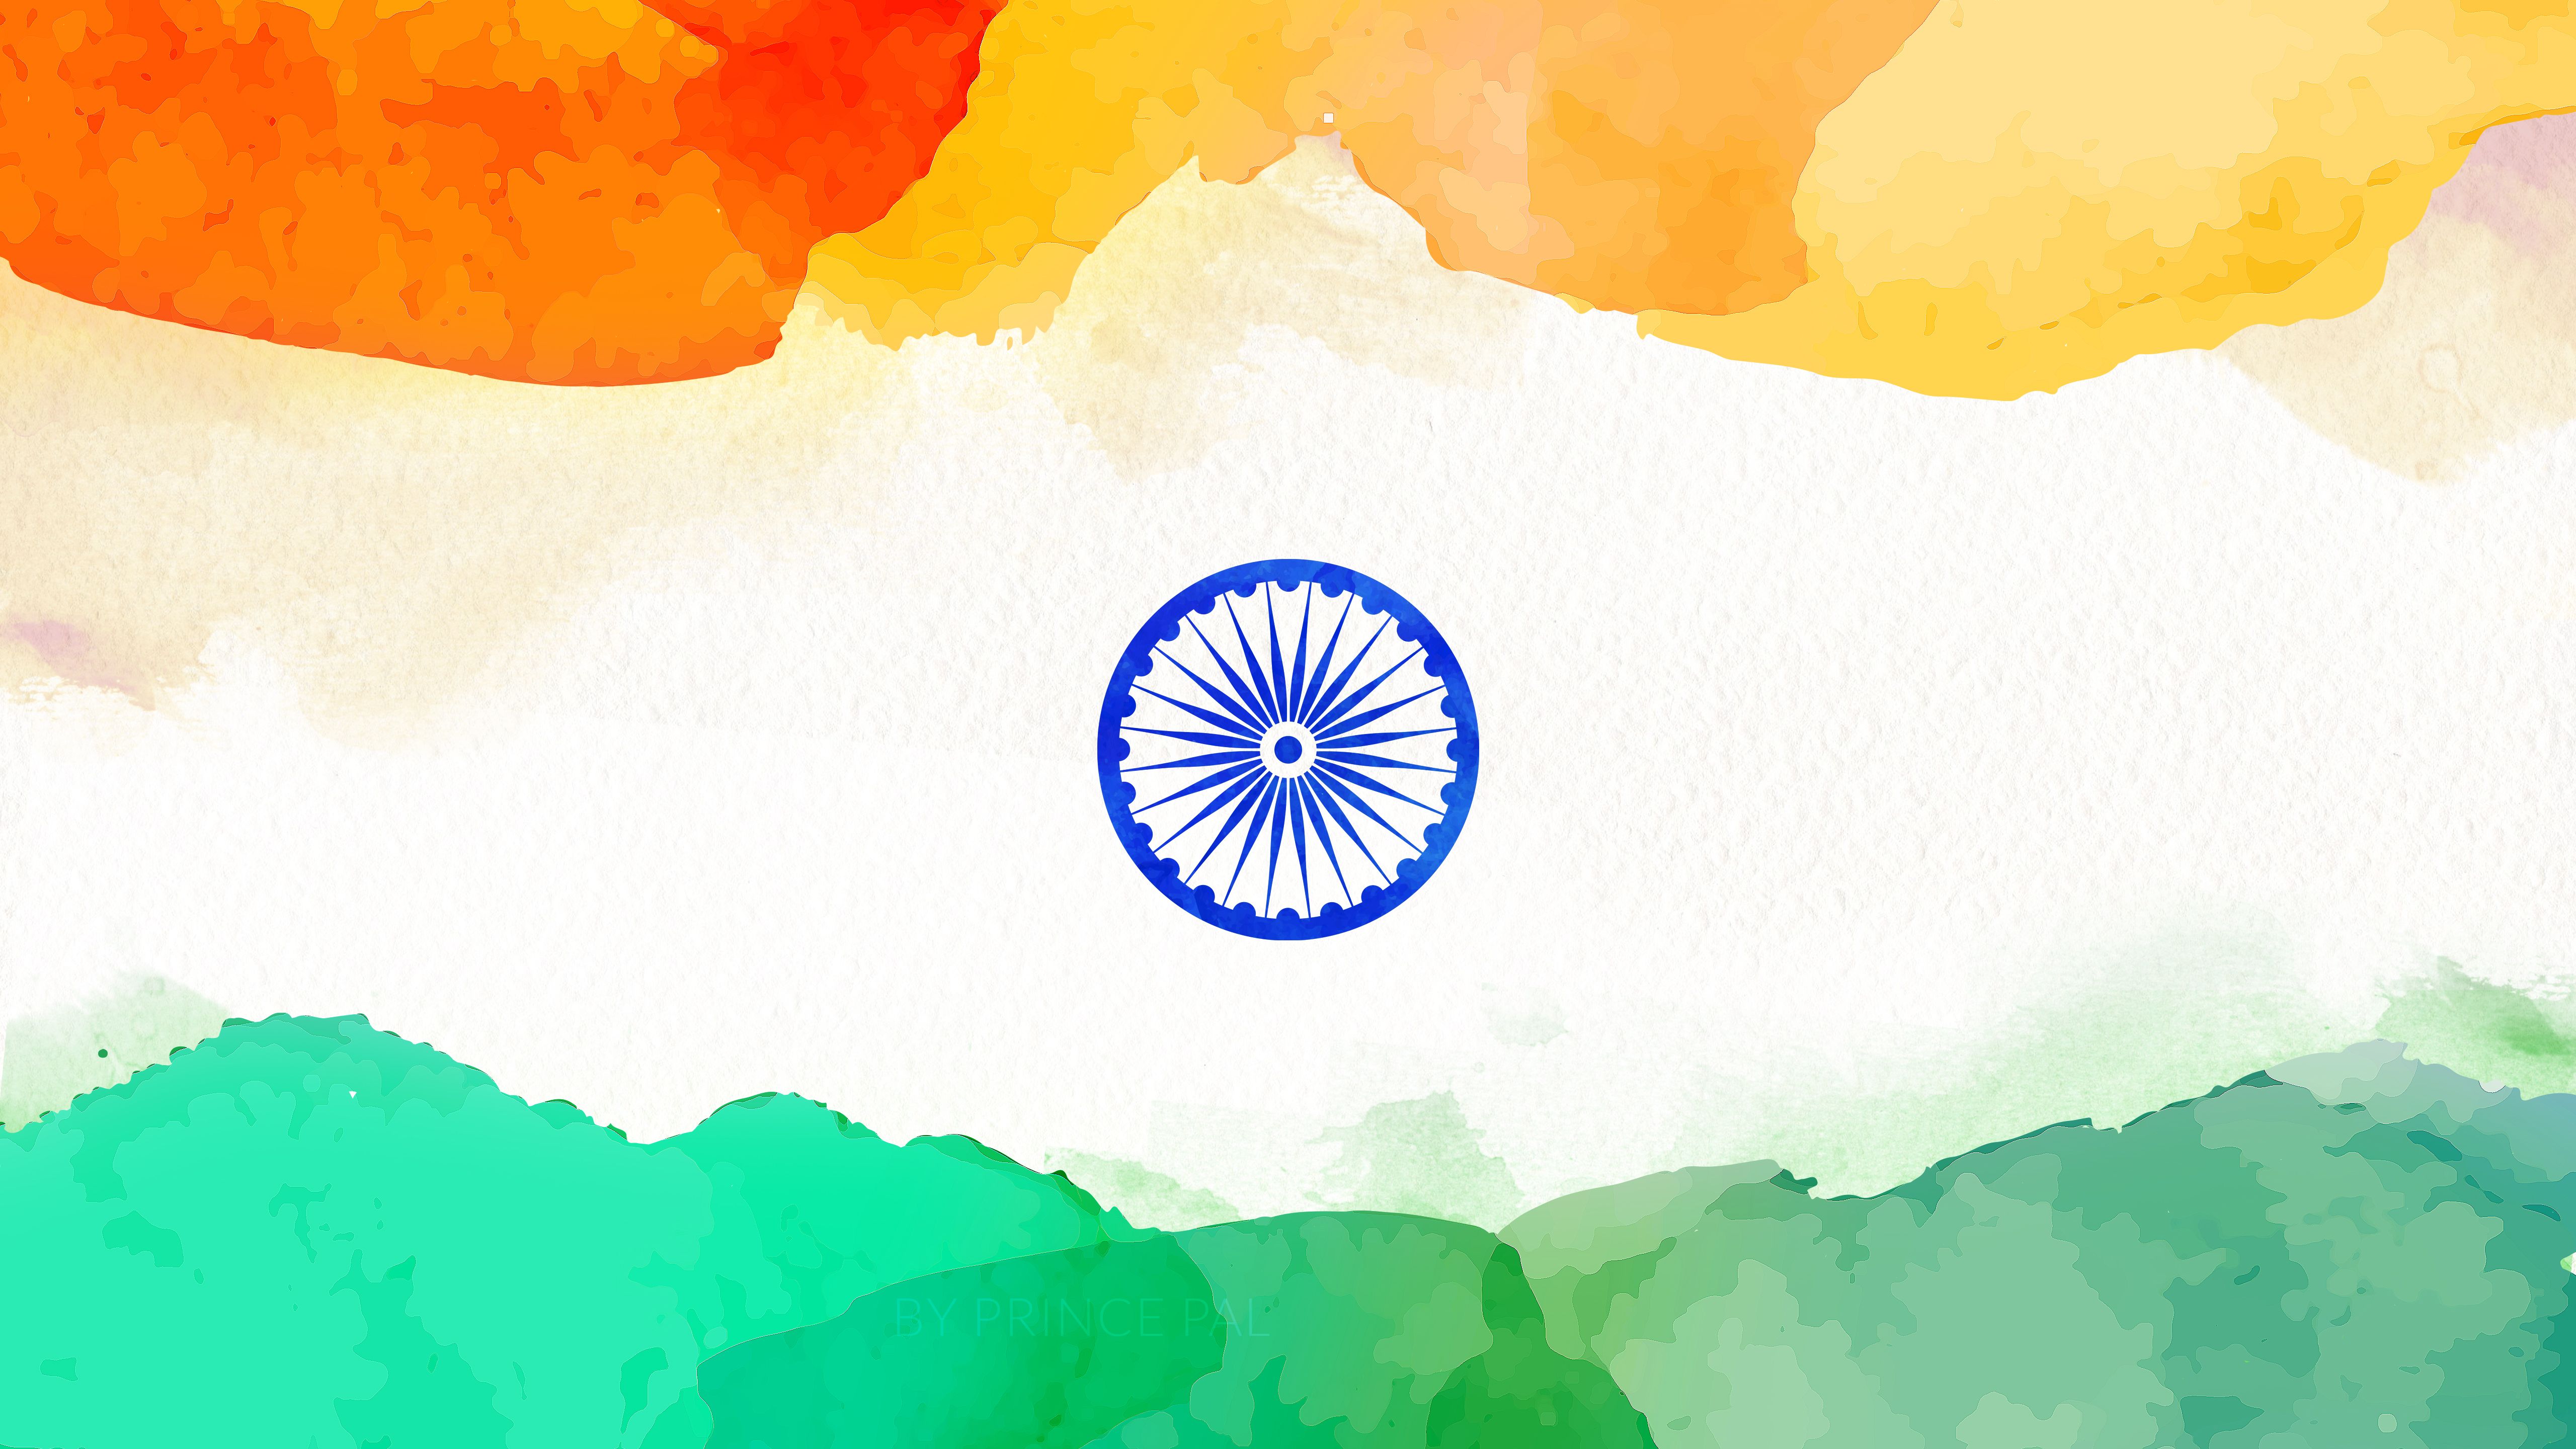 Pioneering Colour Of Indian Flag National Colors Background Stock